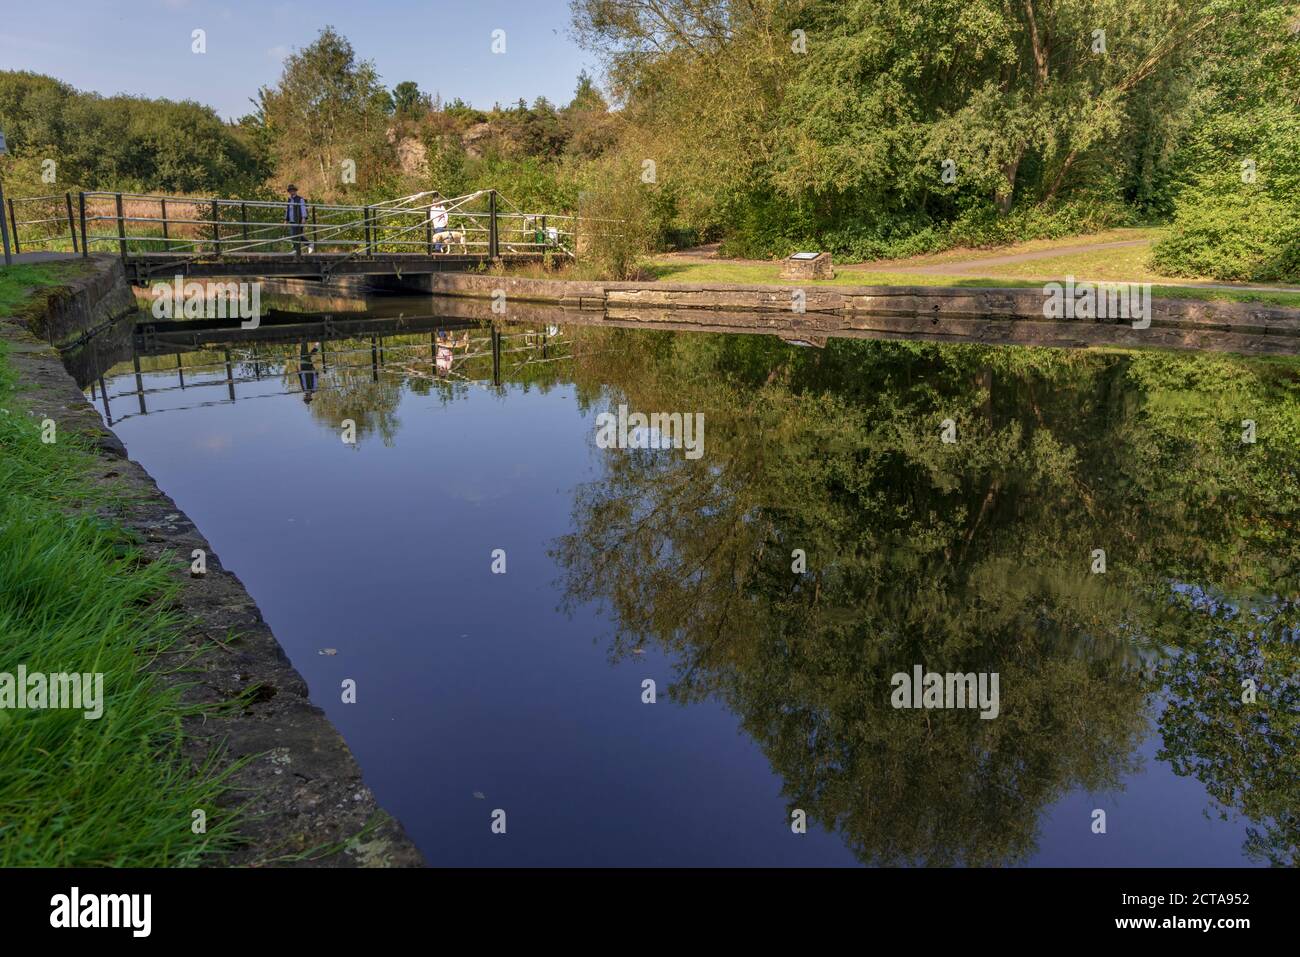 The old canal in Sankey Valley park at Earlestown. The park is a linear country park that runs fom Widnes to Haydock. Stock Photo